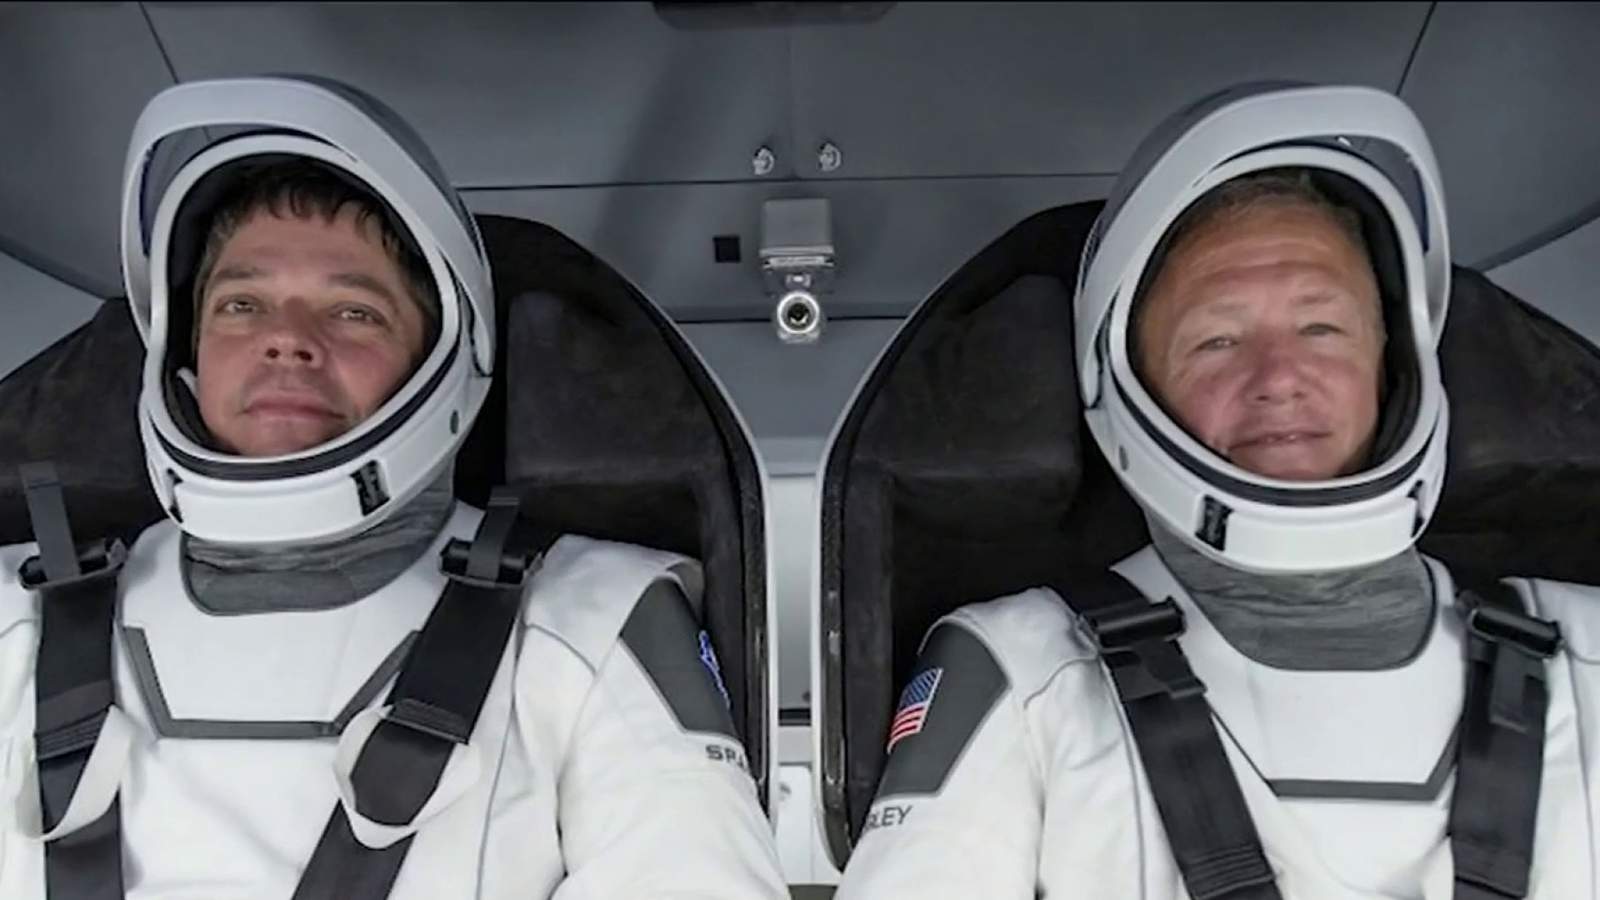 NASA veterans and long-time friends crew first manned SpaceX flight